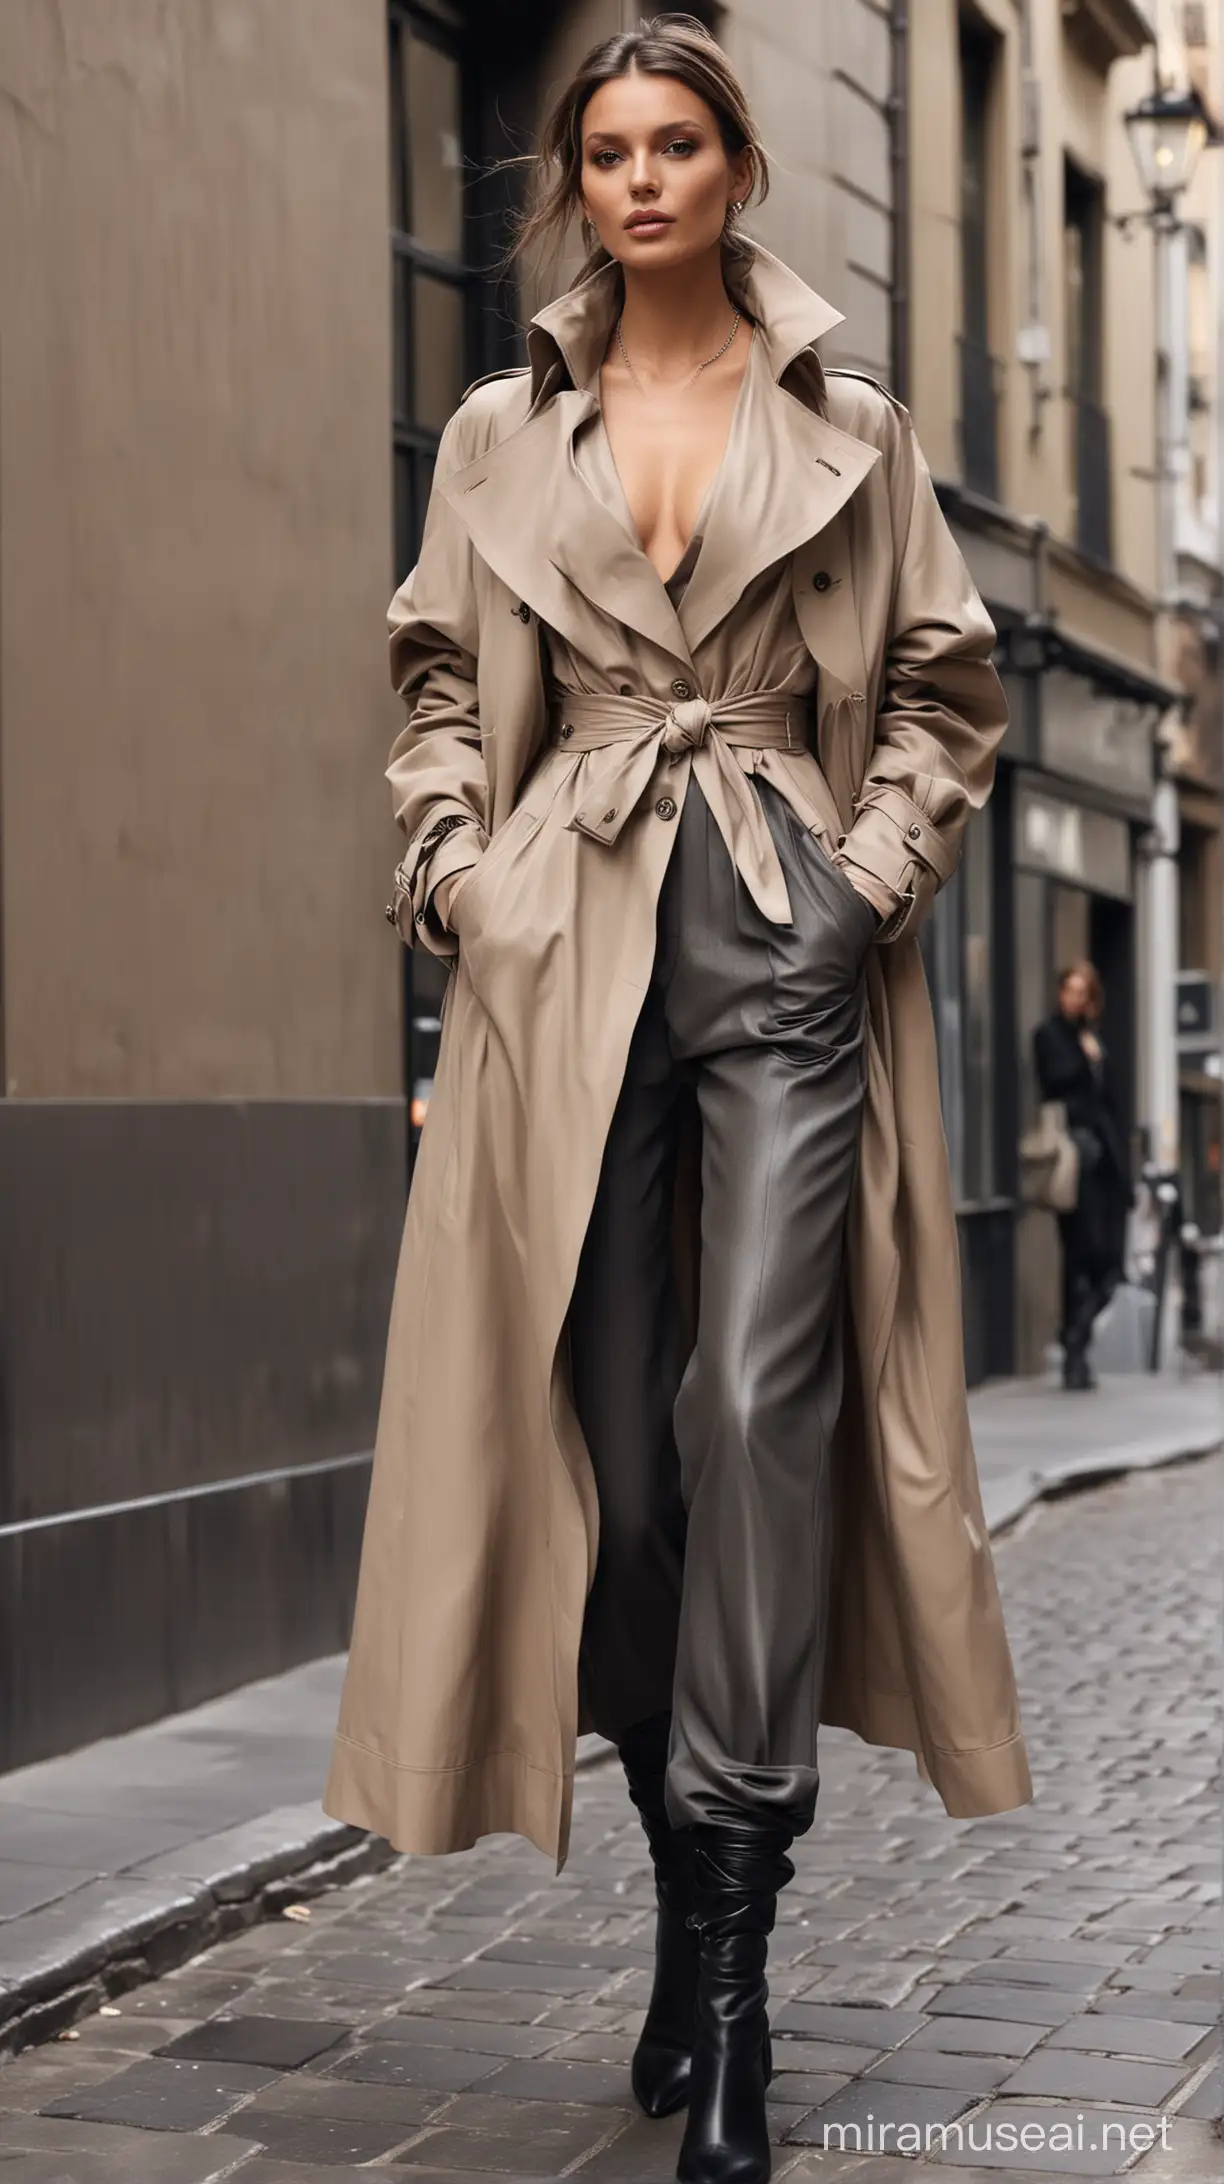 Stunning beautiful supermodel, street motion, front angle, wearing a very long layered taupe trench coat, deep neckline, with large silk sleeves gathered at the elbow, and gray relaxed silhouette leather pants, hands in the pockets, statement jewelry, glam, hyper-realistic, Alexander McQueen style